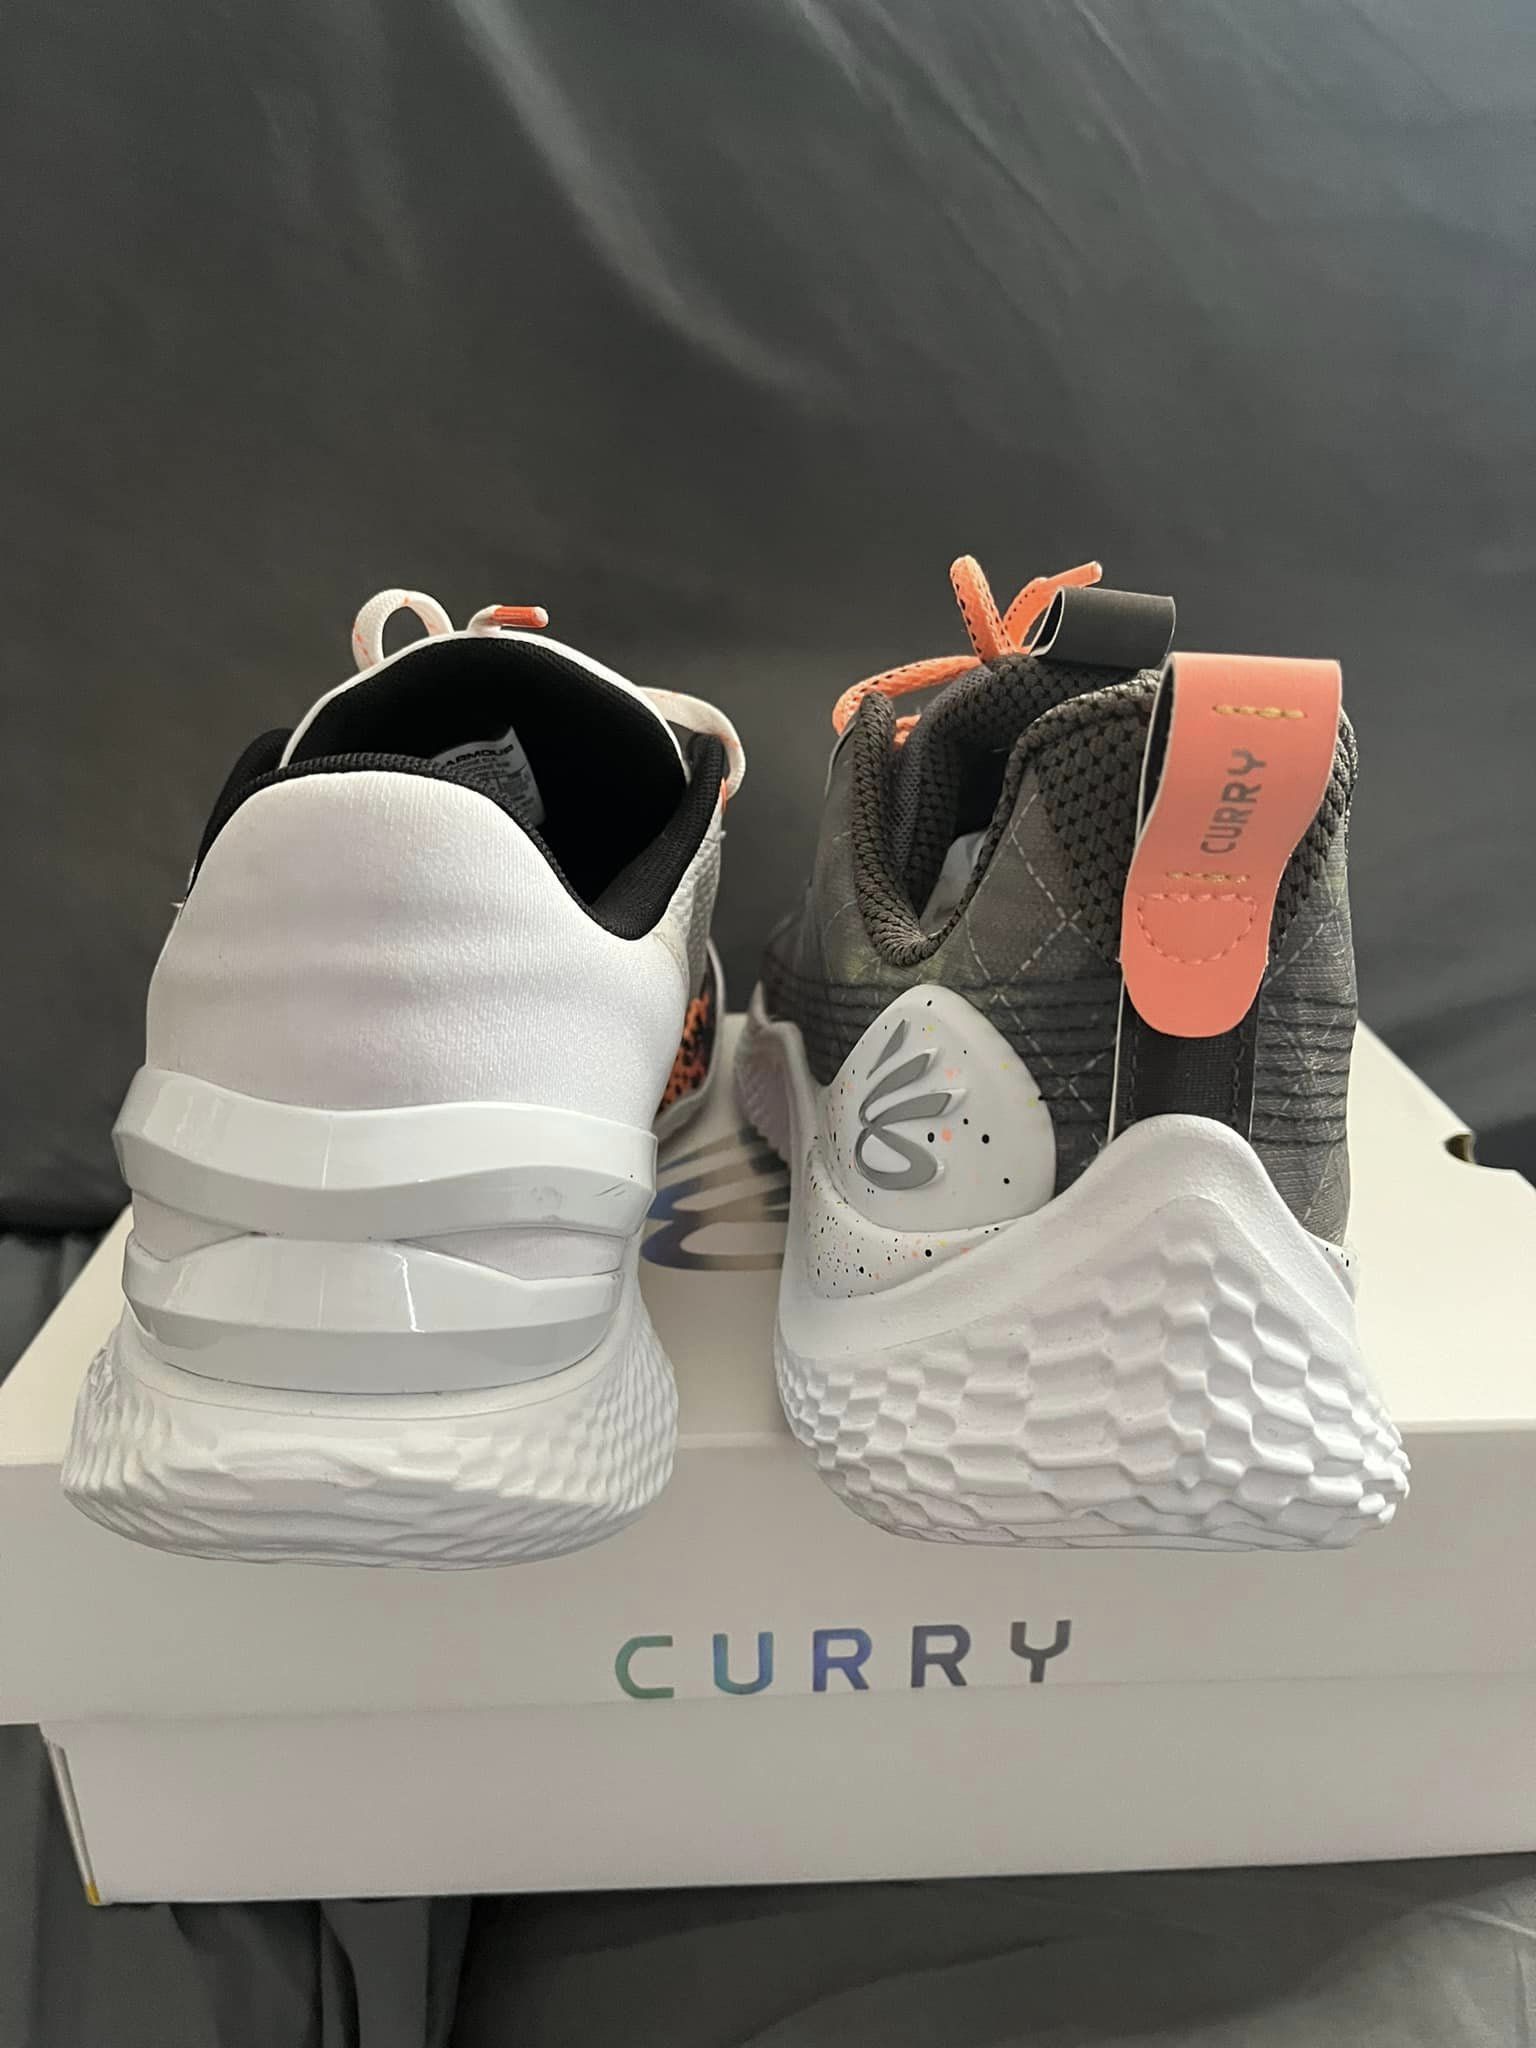 albert-under-armour-curry-2-low-flotro-chef-vs-curry-flow-10